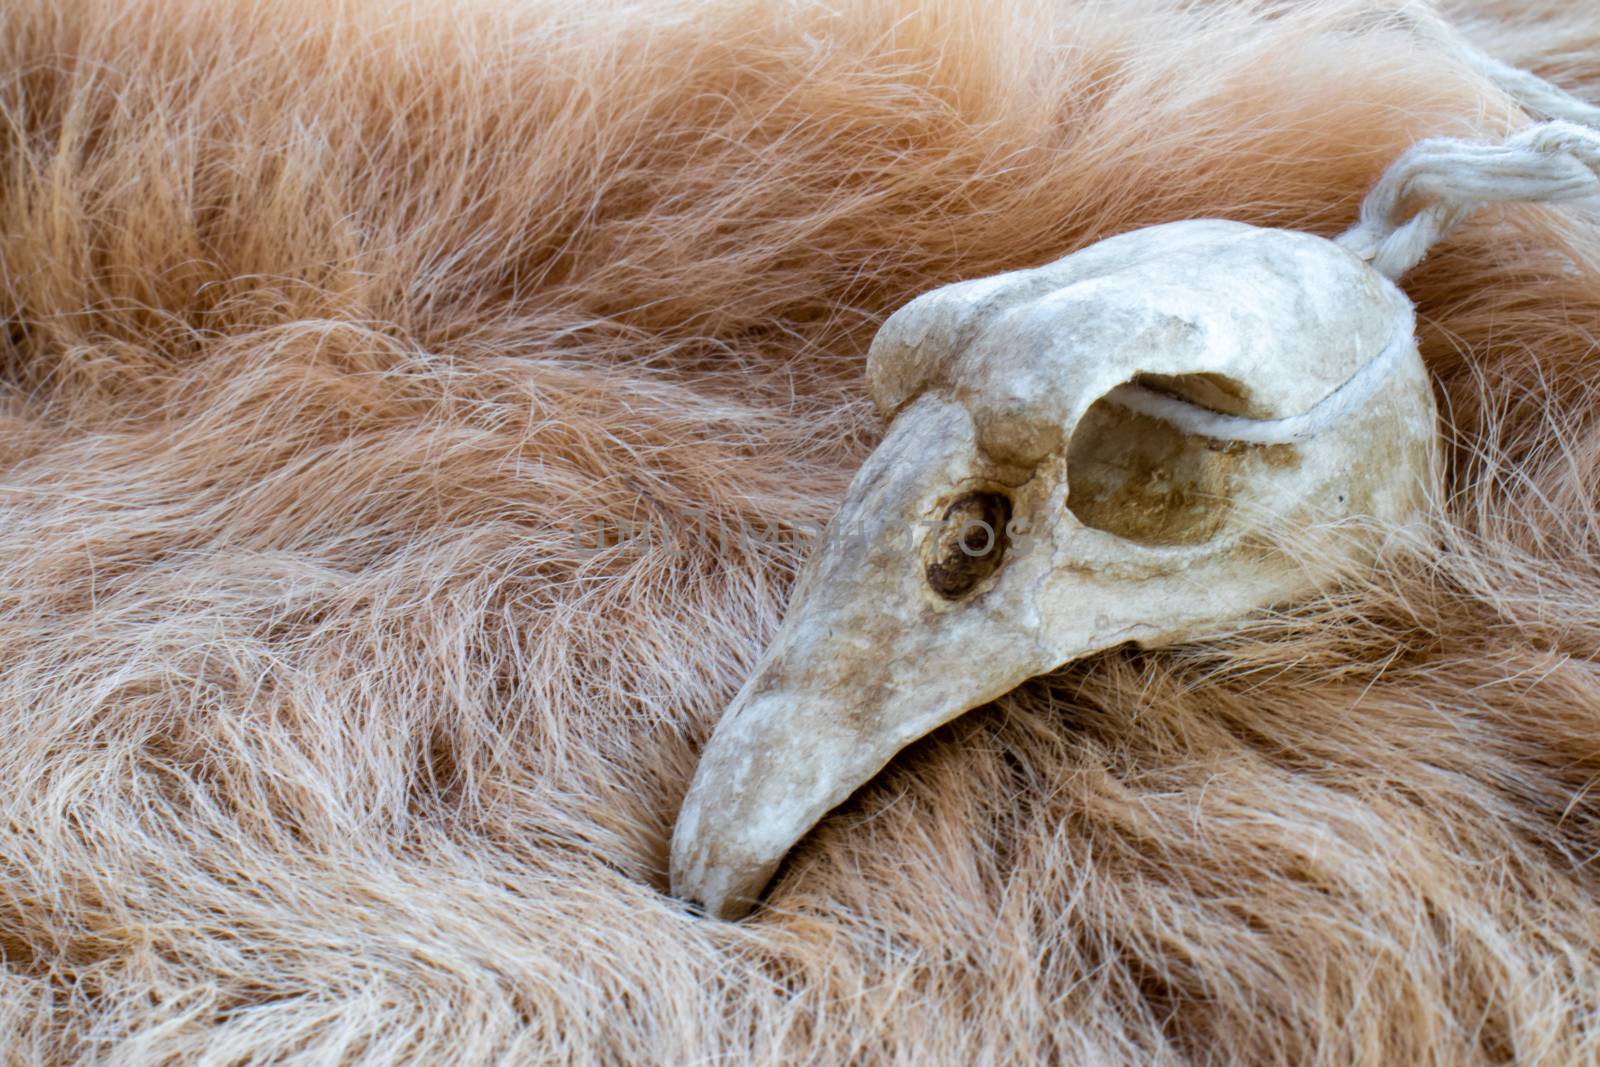 Bird skull on a animal fur. Necklace for rituals of a druid or magician. by Andreajk3